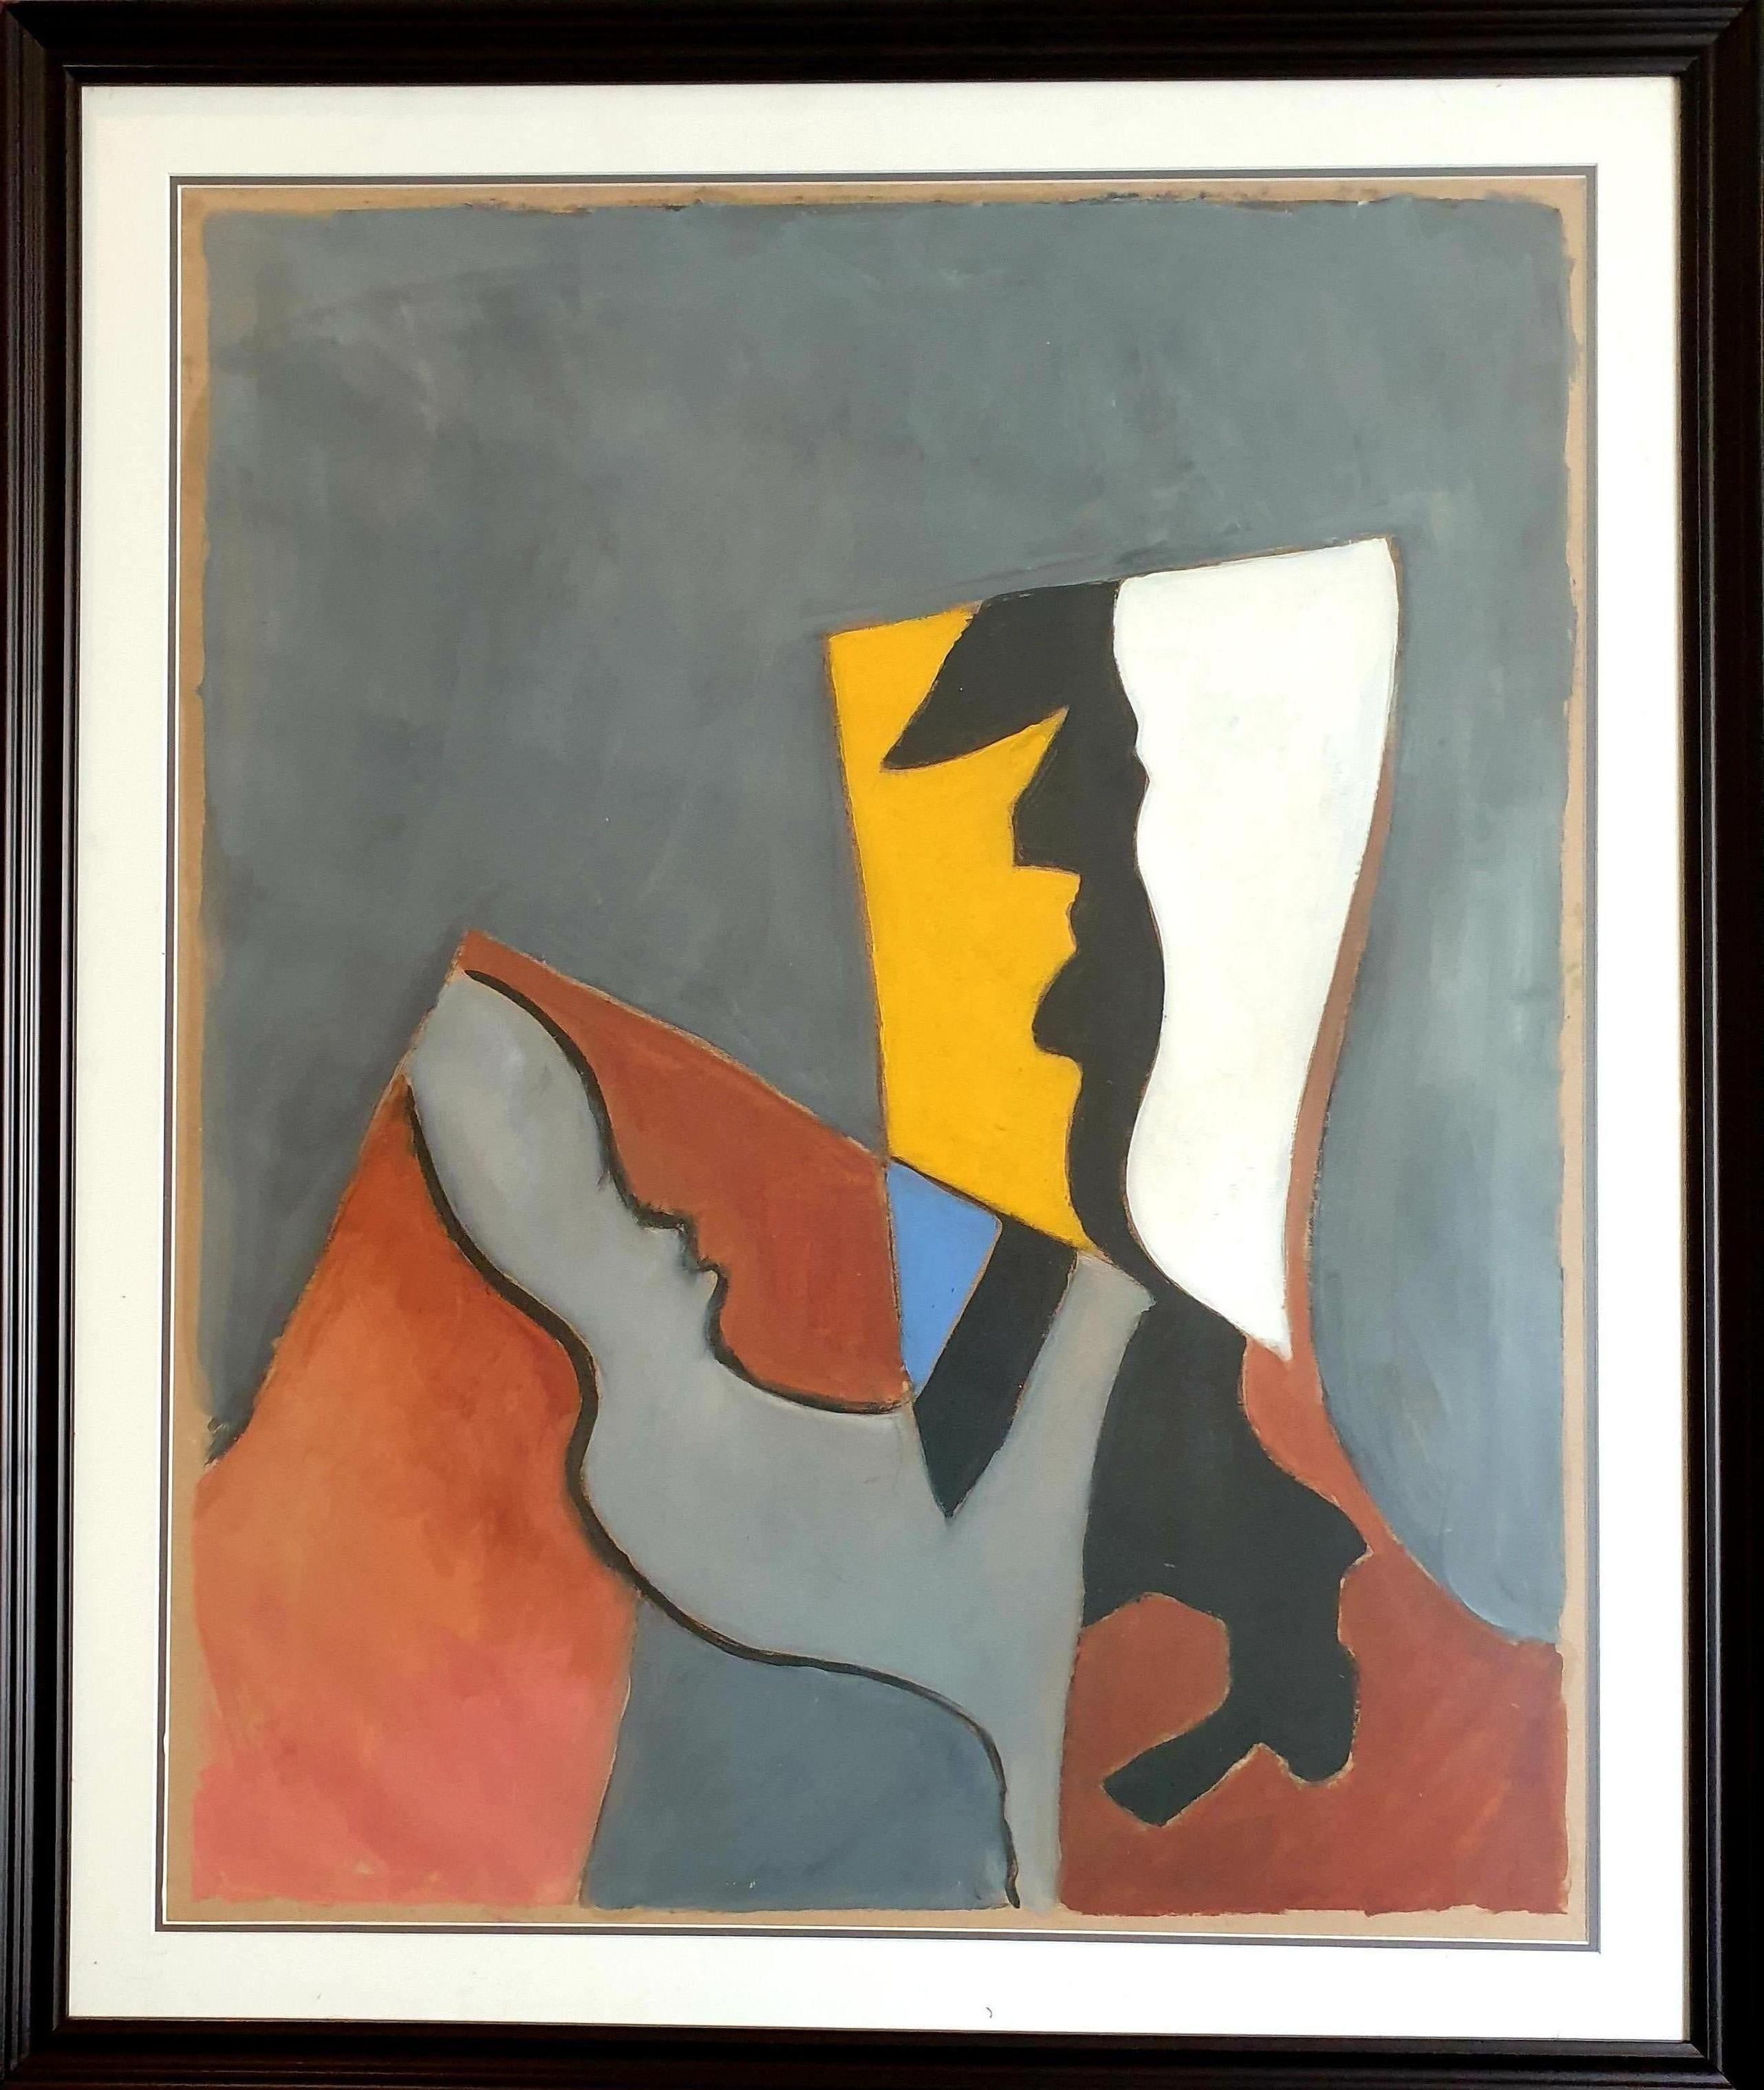 Serge Poliakoff Abstract Painting – Abstraktes Tachiste-Acryl auf Papier, Hommage an Poliakoff. 